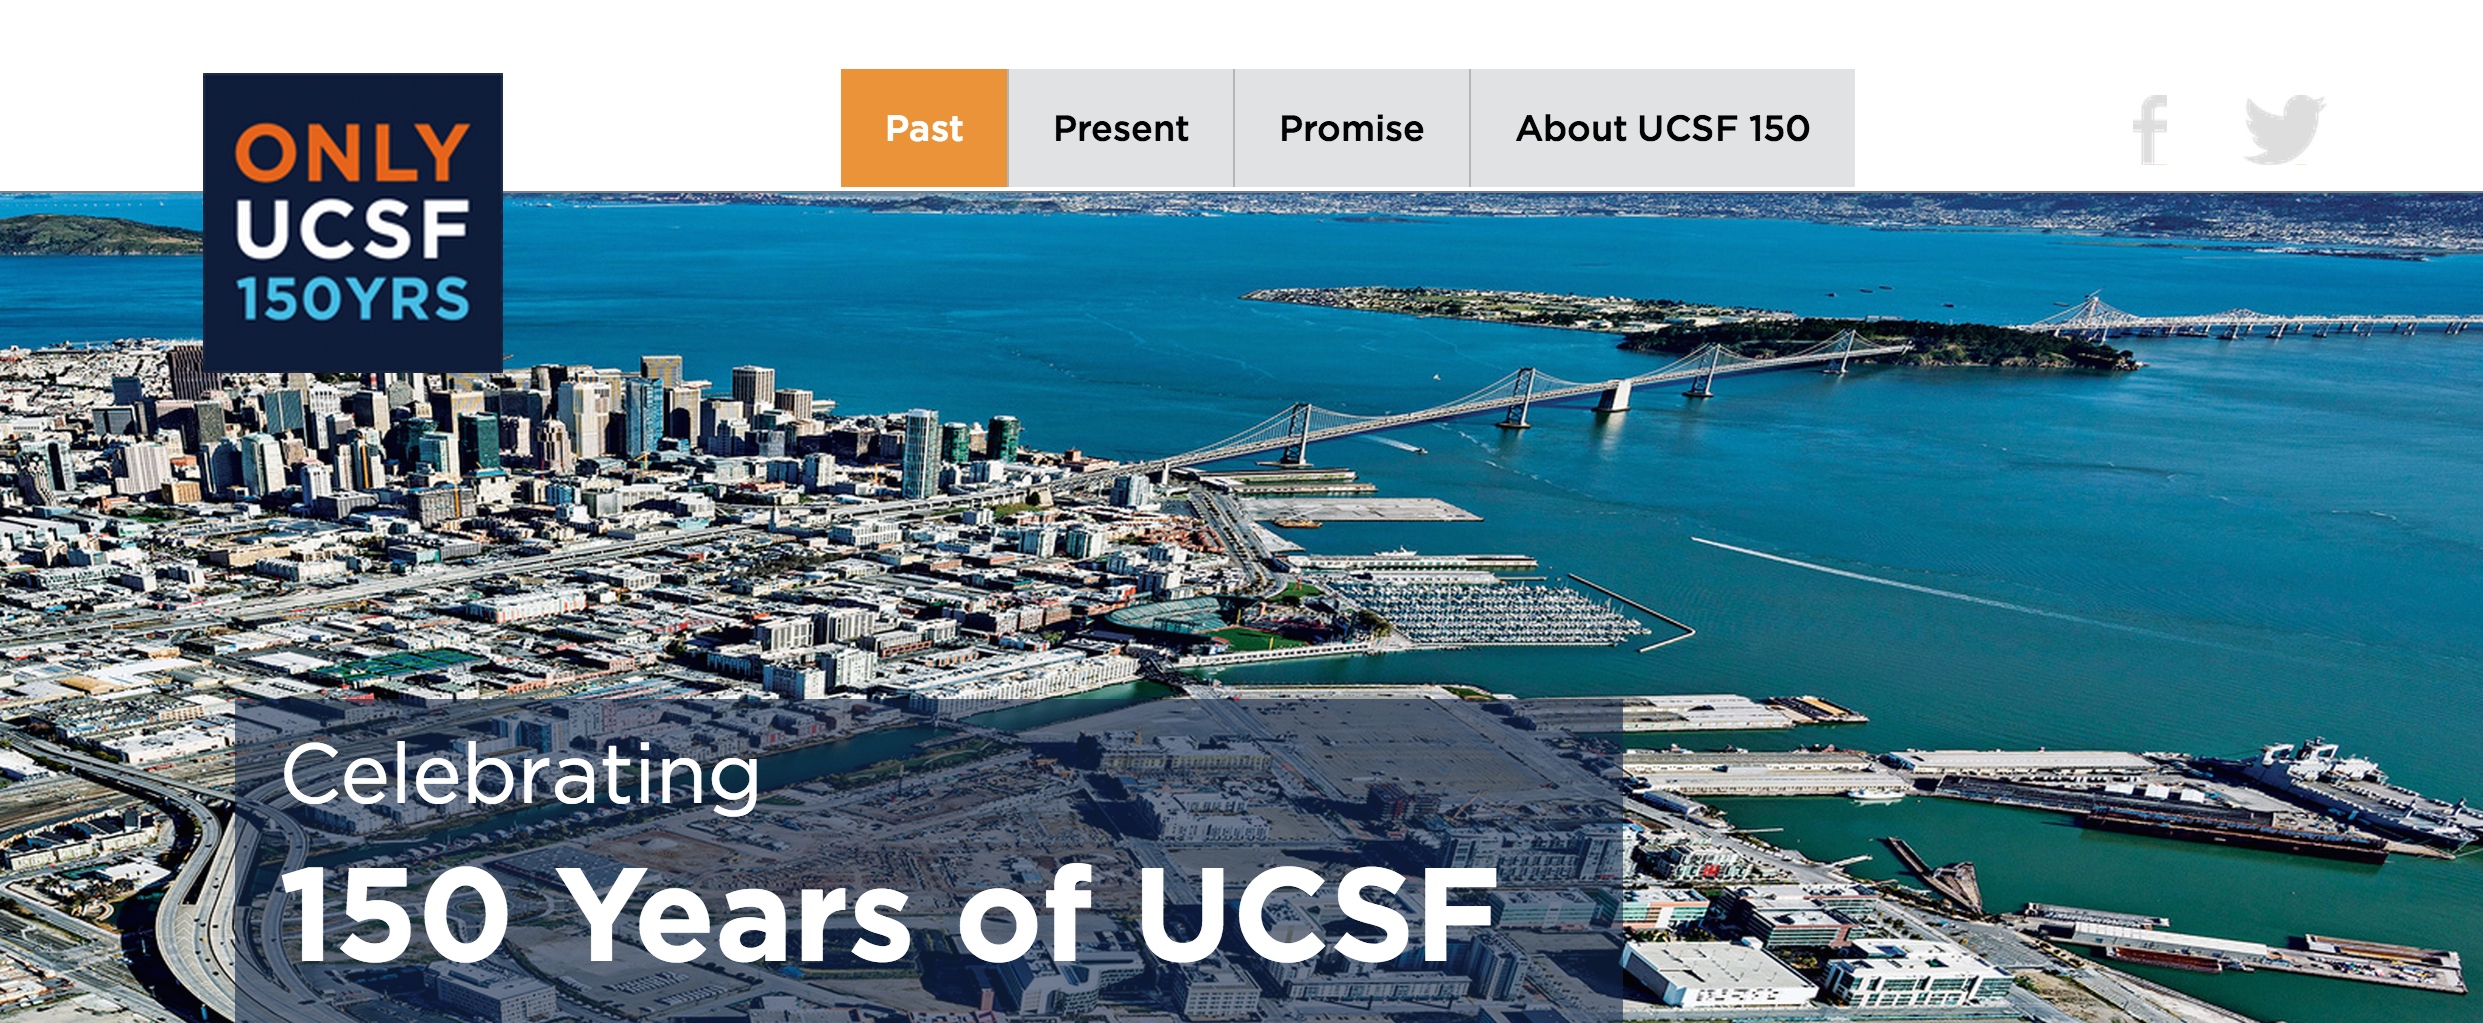 Celebrating 150 years of UCSF